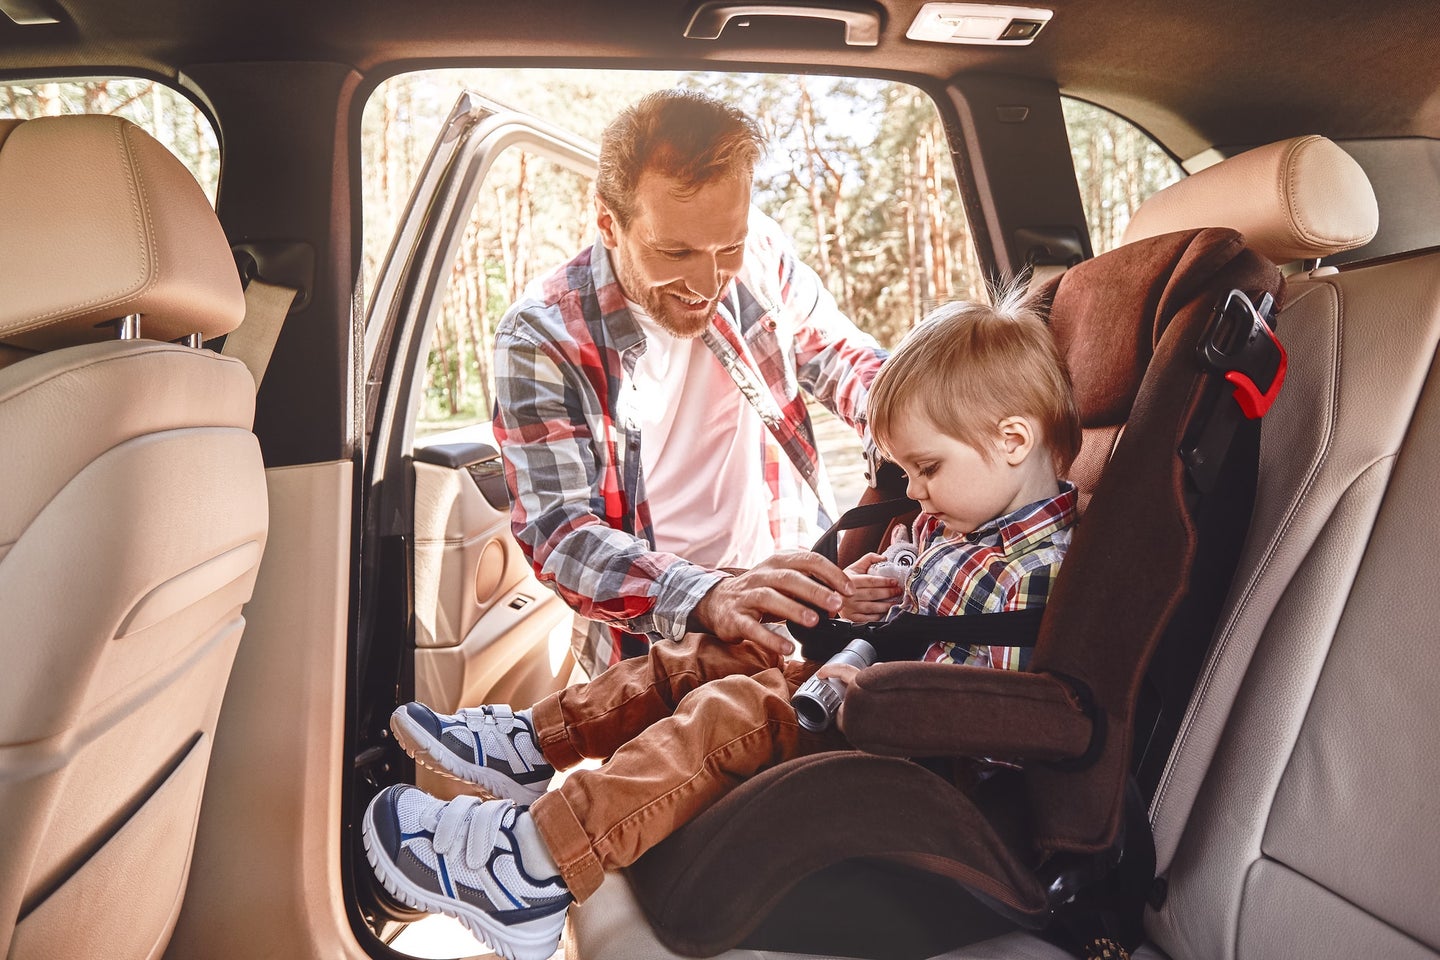 The Best Black Friday Car Seat Deals 2020: The Best Boosters, Convertibles, and More